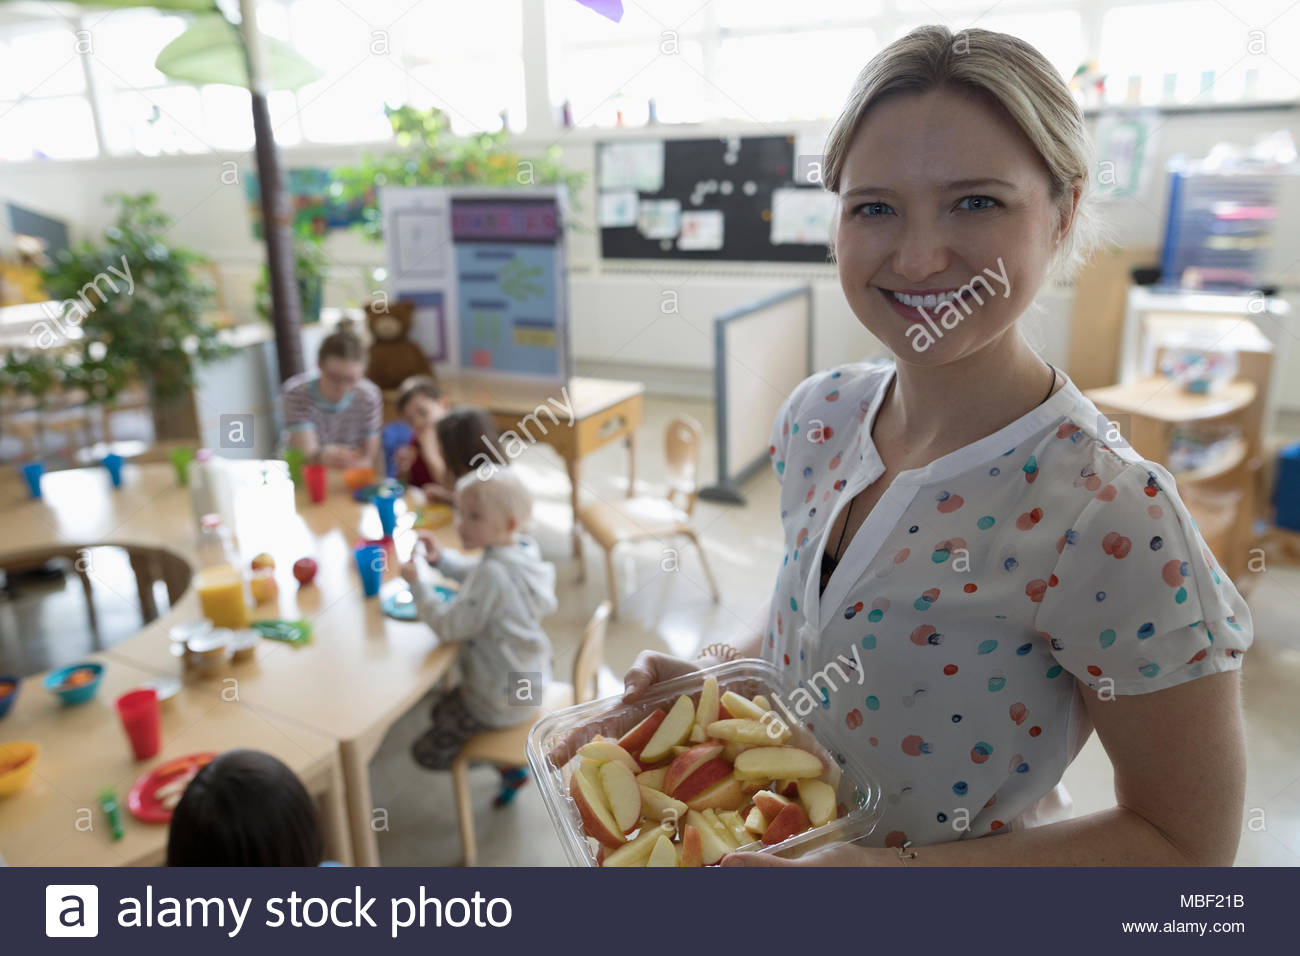 Portrait smiling, confident preschool teacher serving apple slices during snack time in classroom Stock Photo